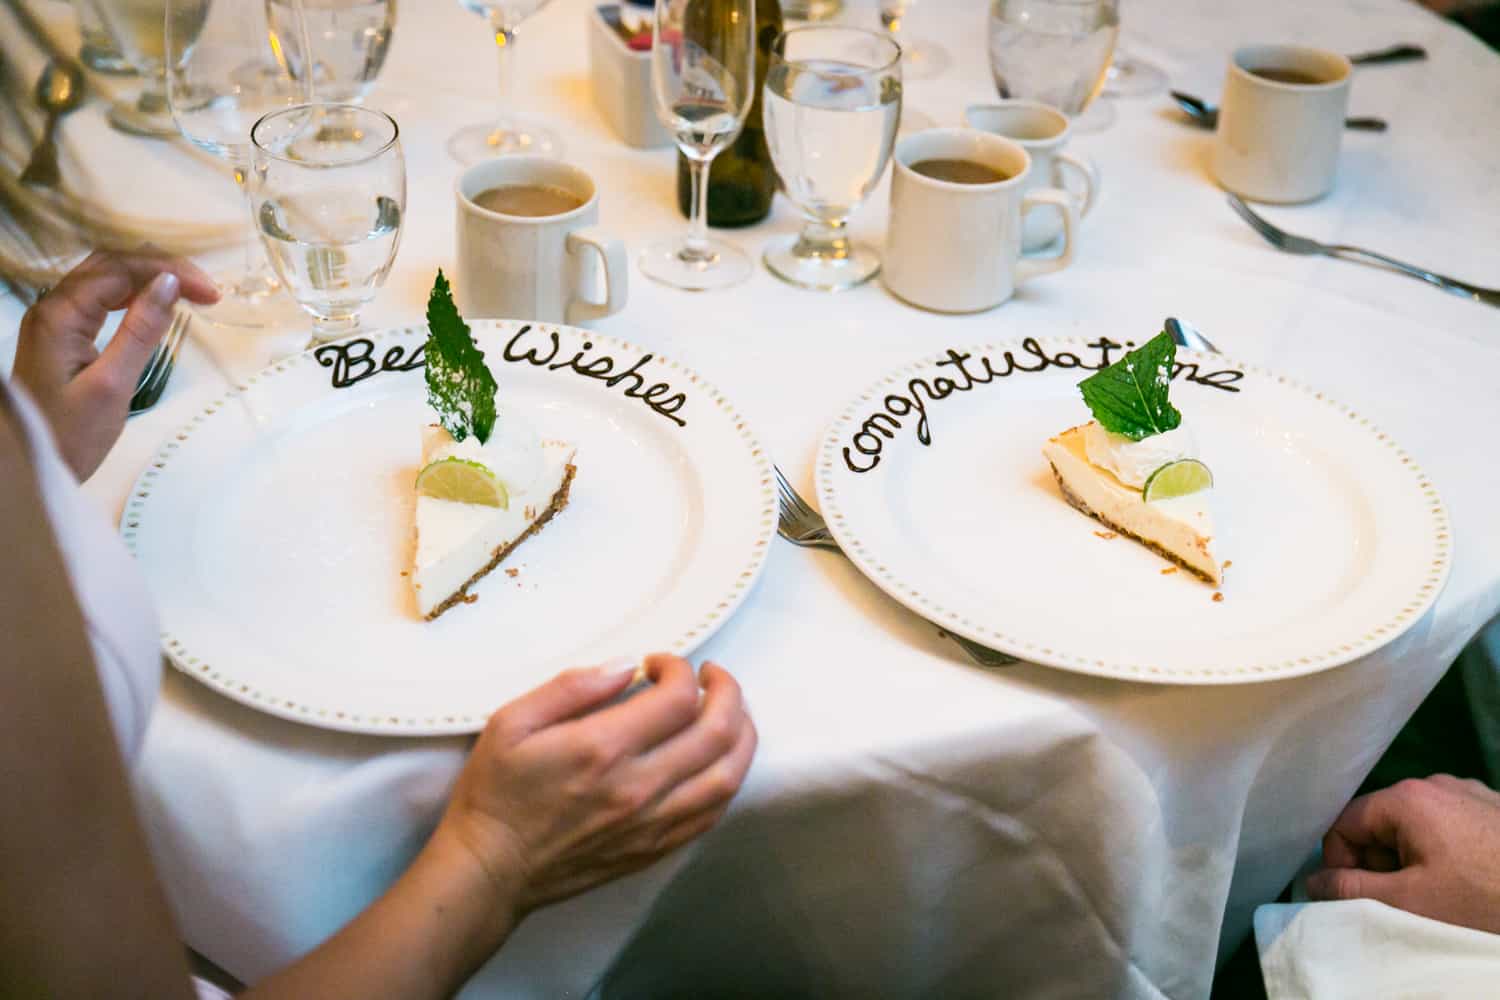 Two plates of key lime pie with writing in chocolate